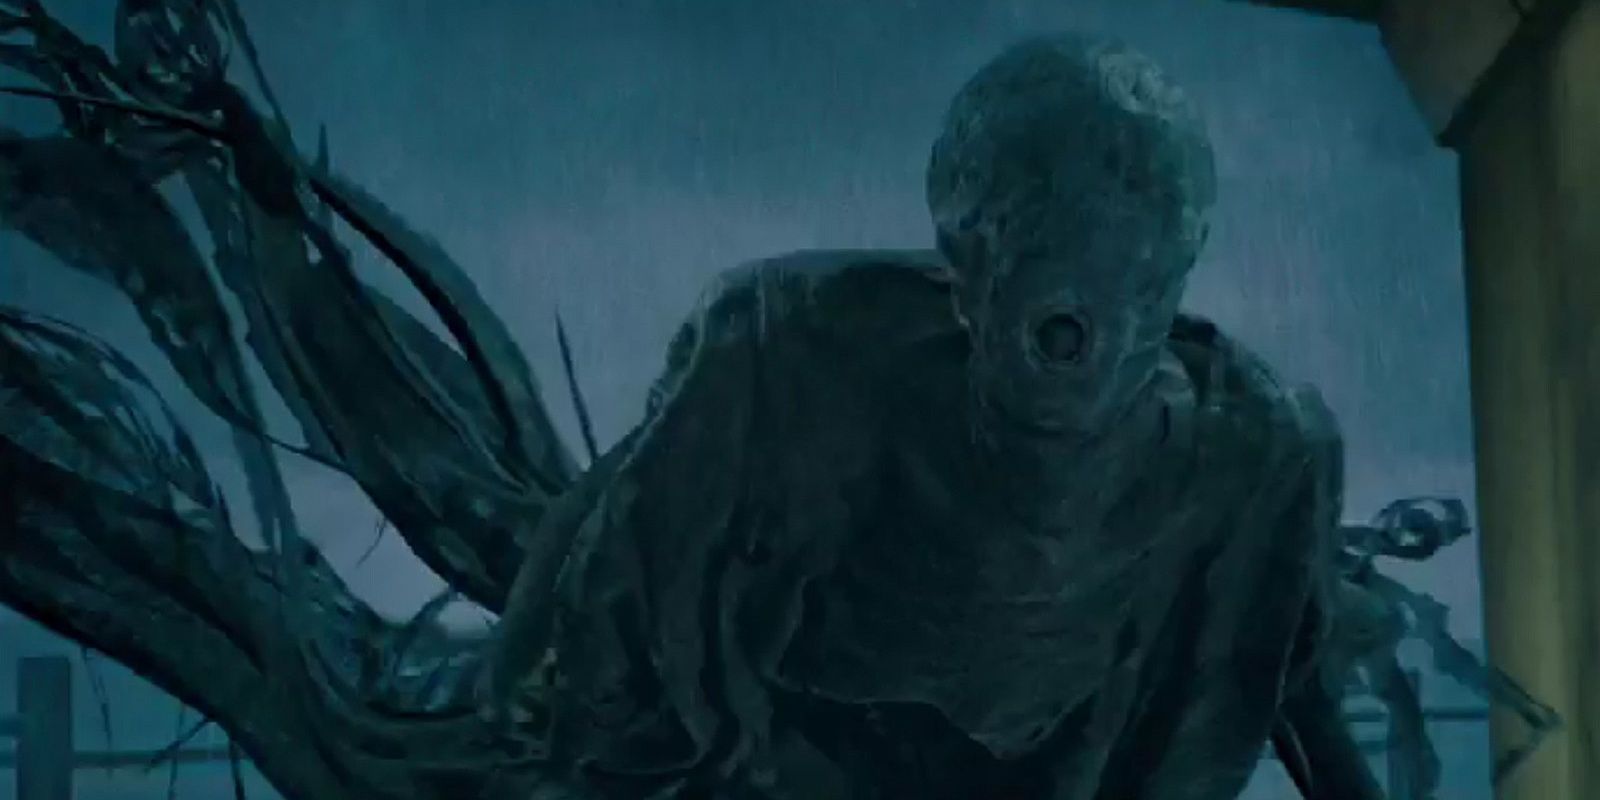 A Dementor about to give the Dementor's kiss to someone in Harry Potter.